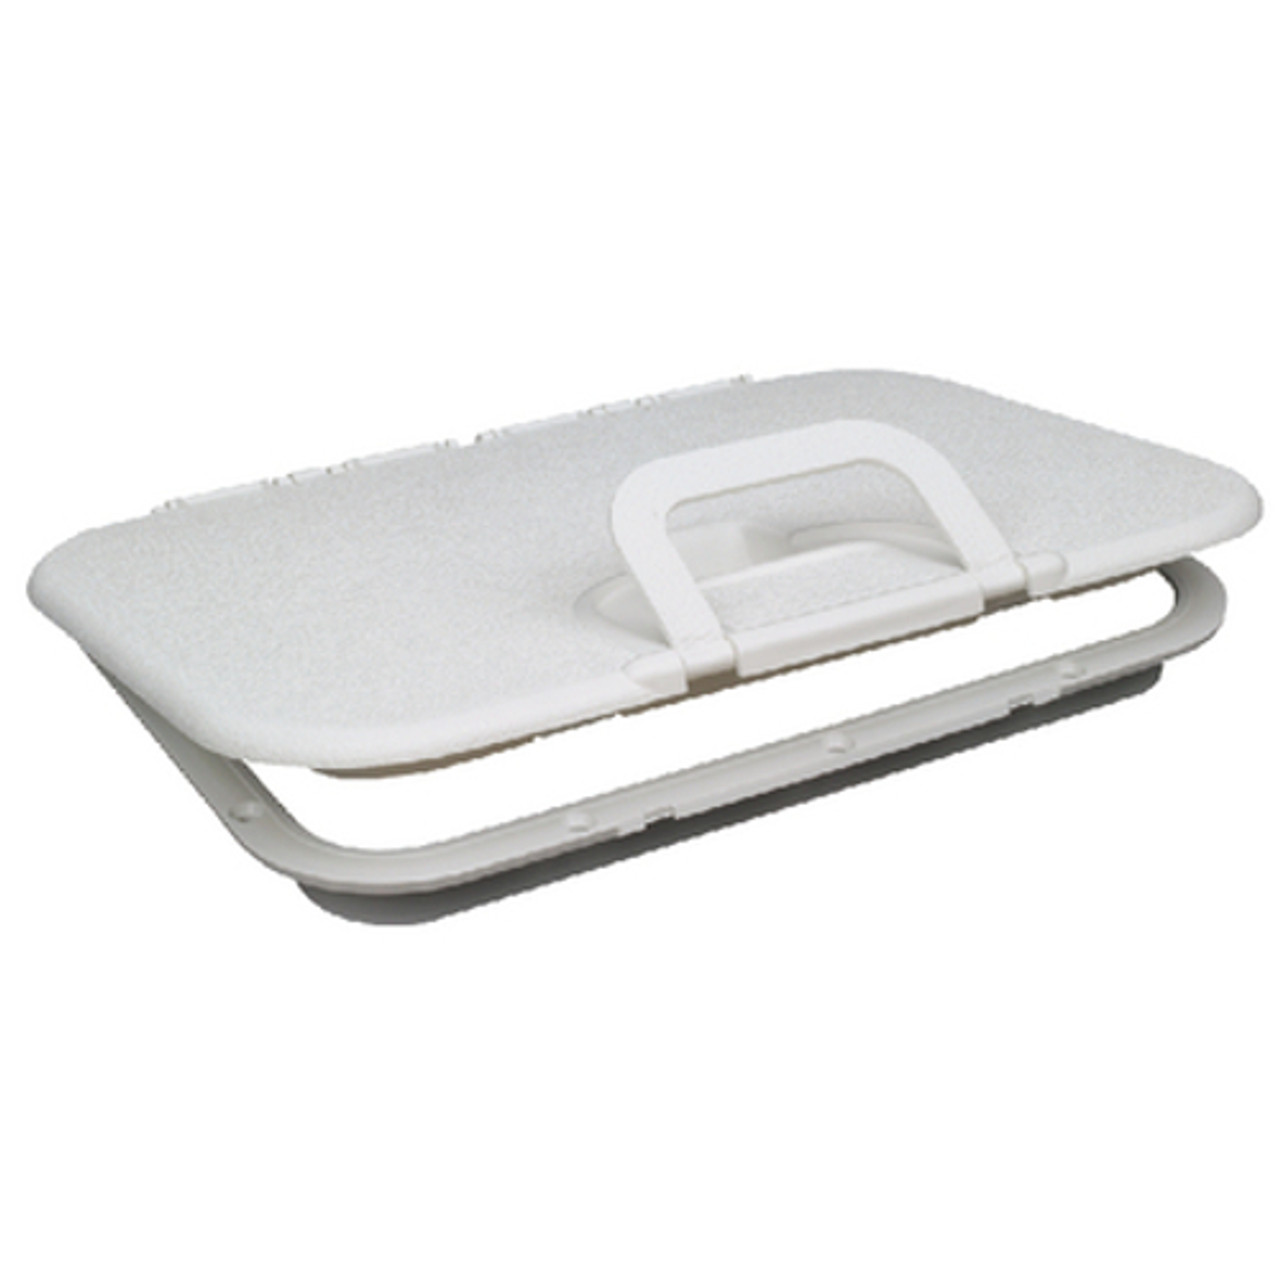 23-3/8 x 13-1/4 Inch White Hinged Offshore Deck Hatch for Boats